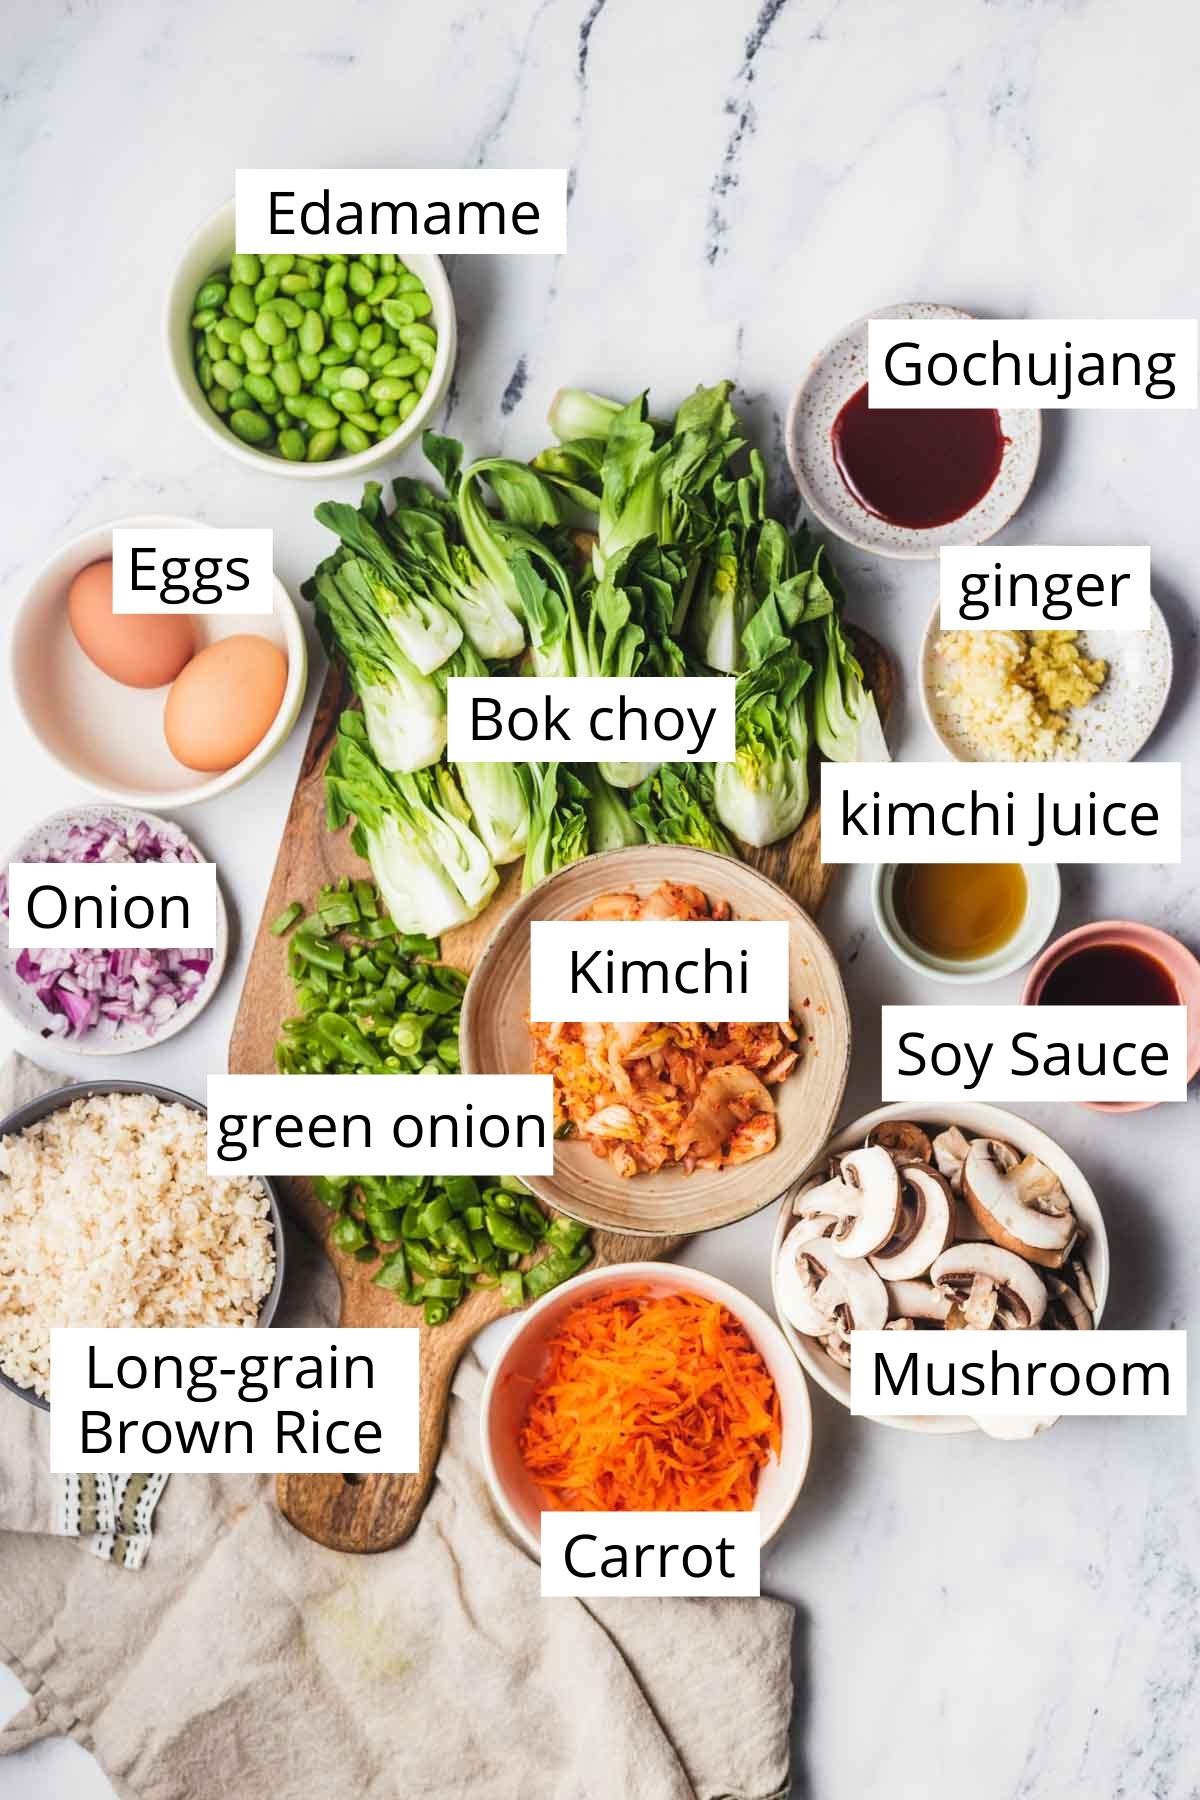 A birds-eye shot of the ingredients used for the dish including gochujang, eggs, kimchi, kimchi juice, long-grain brown rice, and vegetables including carrot, bok choy, mushroom, onion, snap pea, green onion, garlic and edamame. 